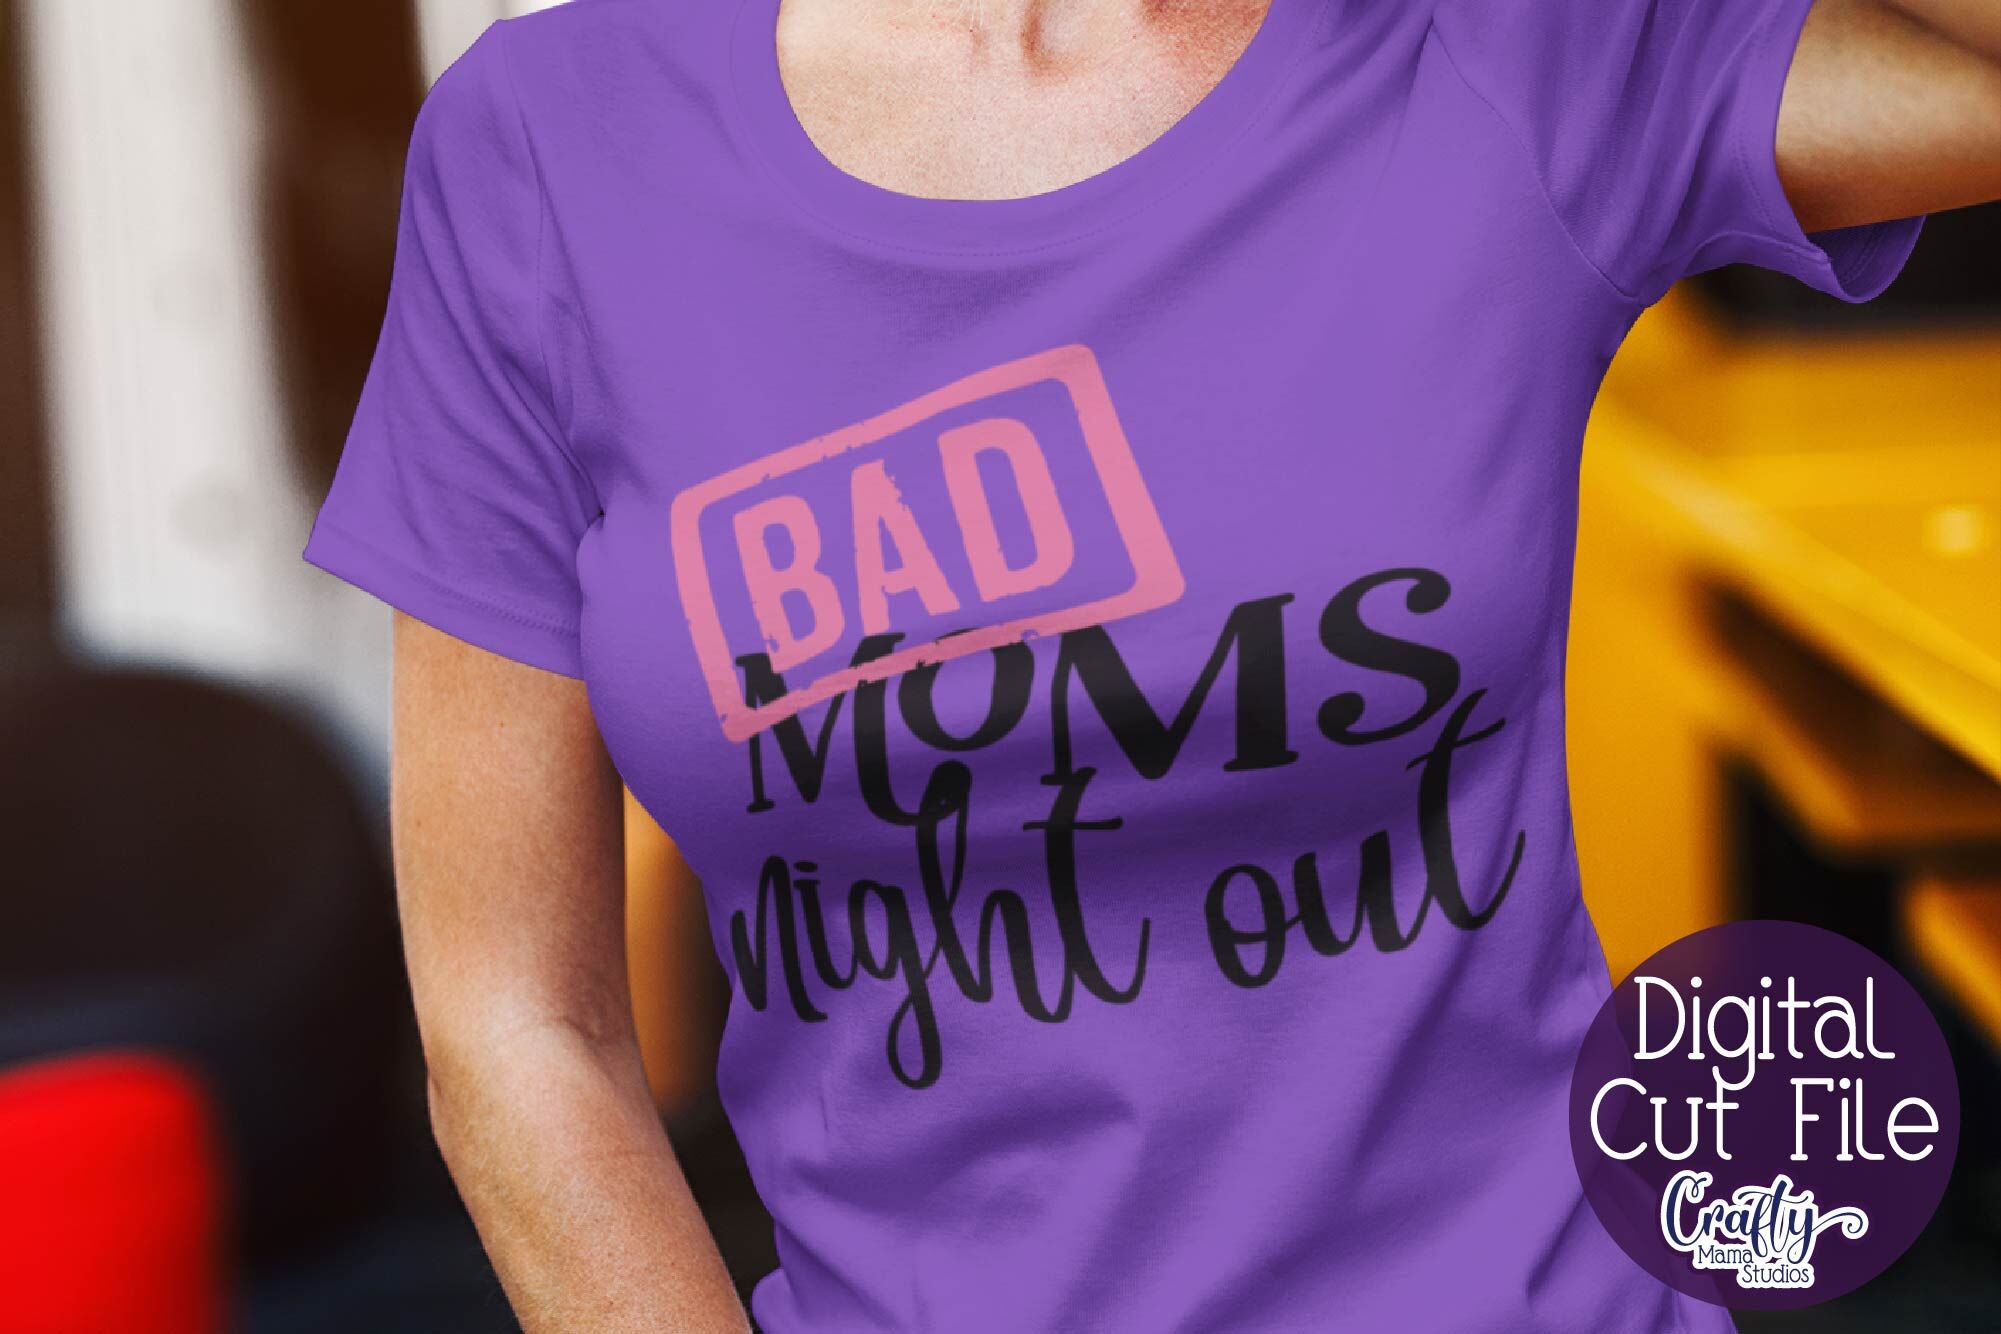 moms night out logo